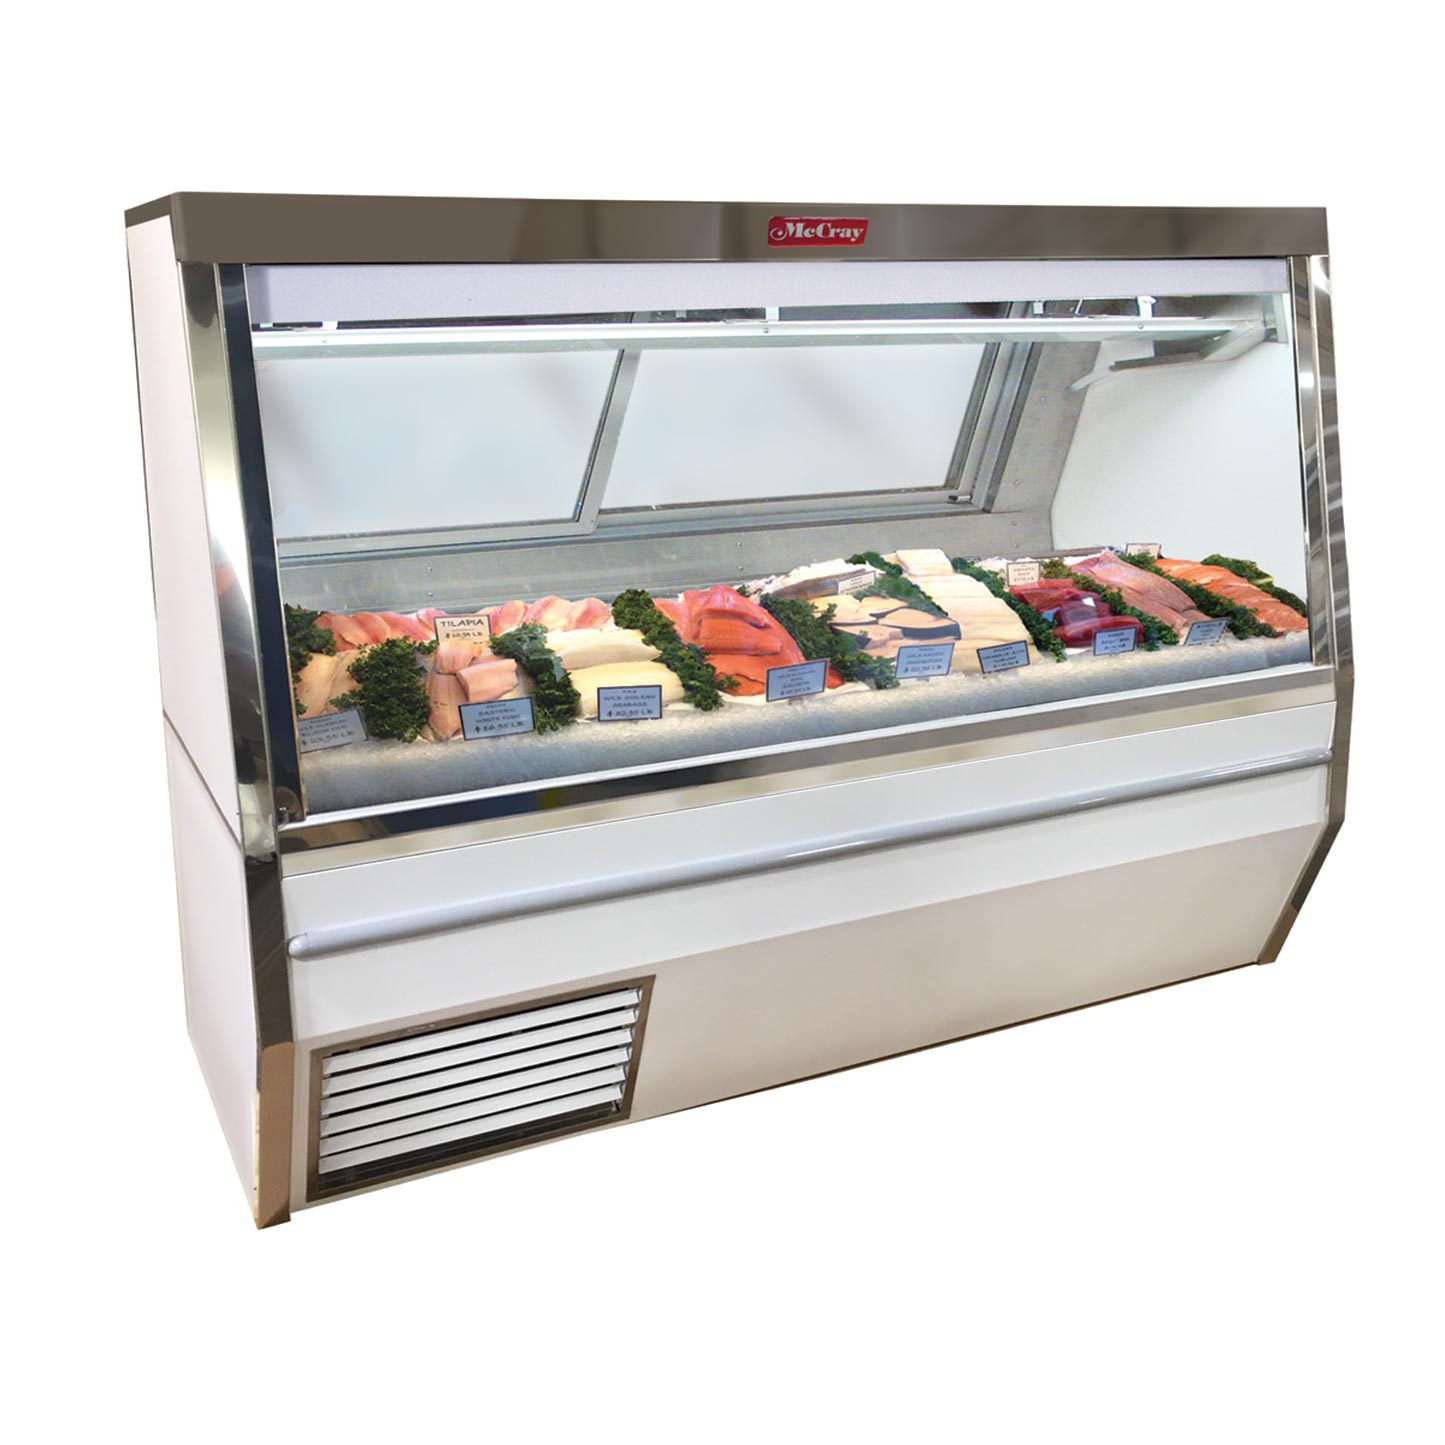 Howard-McCray SC-CFS34N-8-S-LED Deli Seafood / Poultry Display Case